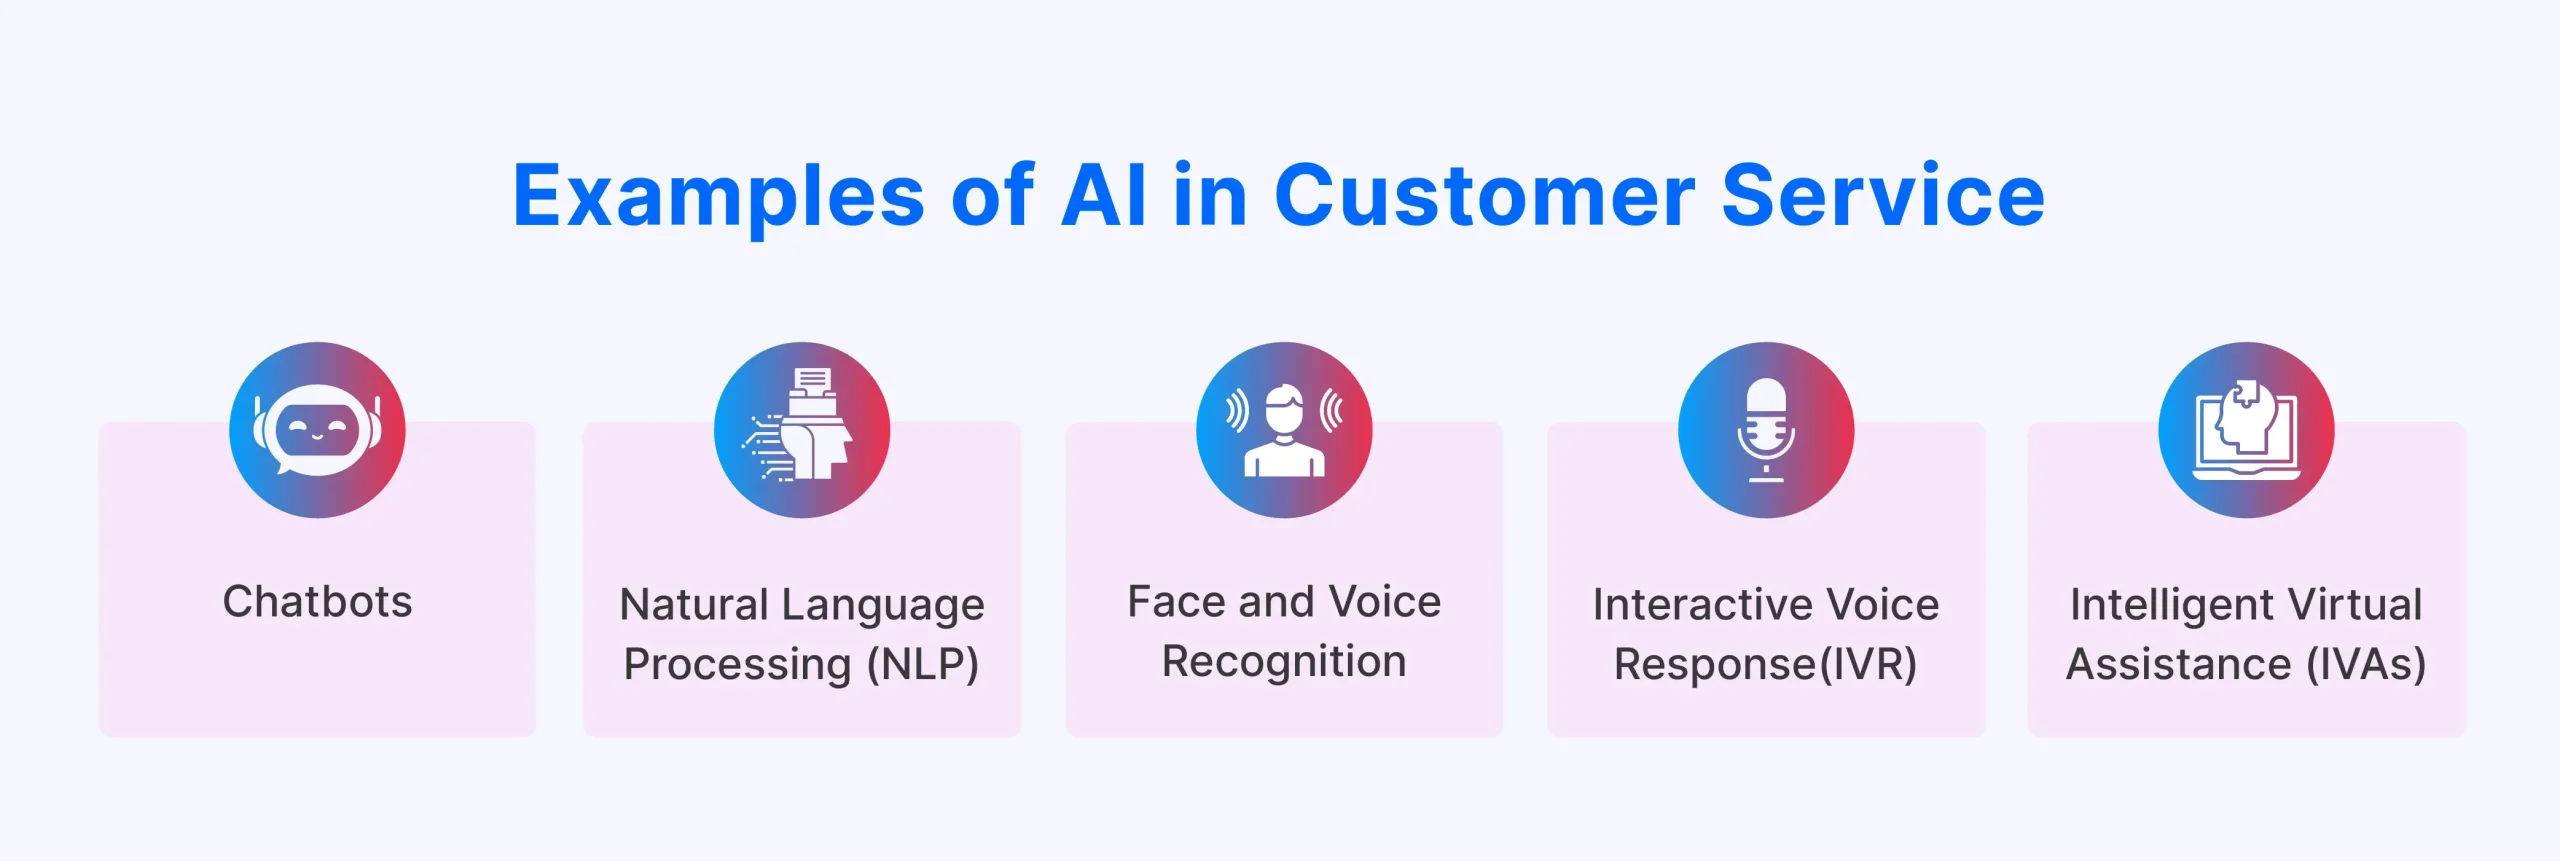 Examples of AI in Customer Service
